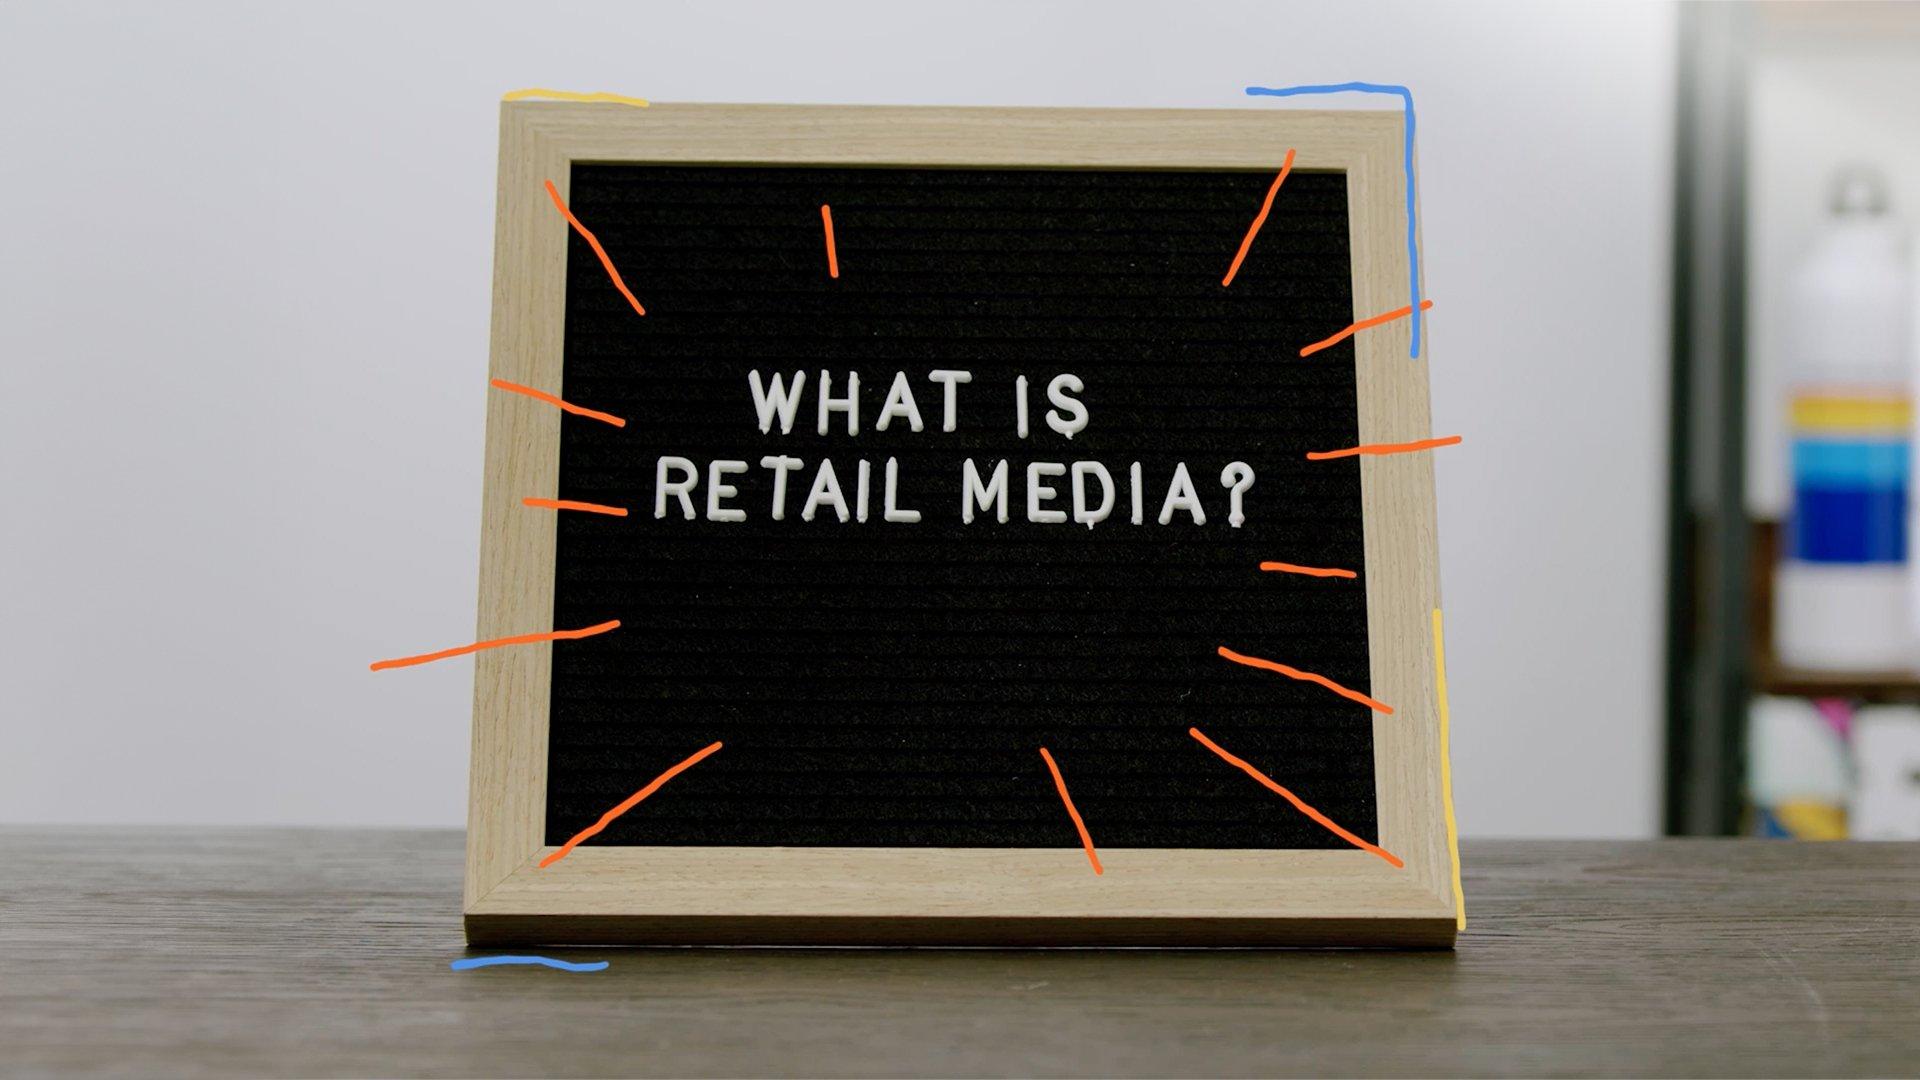 Board displaying copy "what is retail media?"